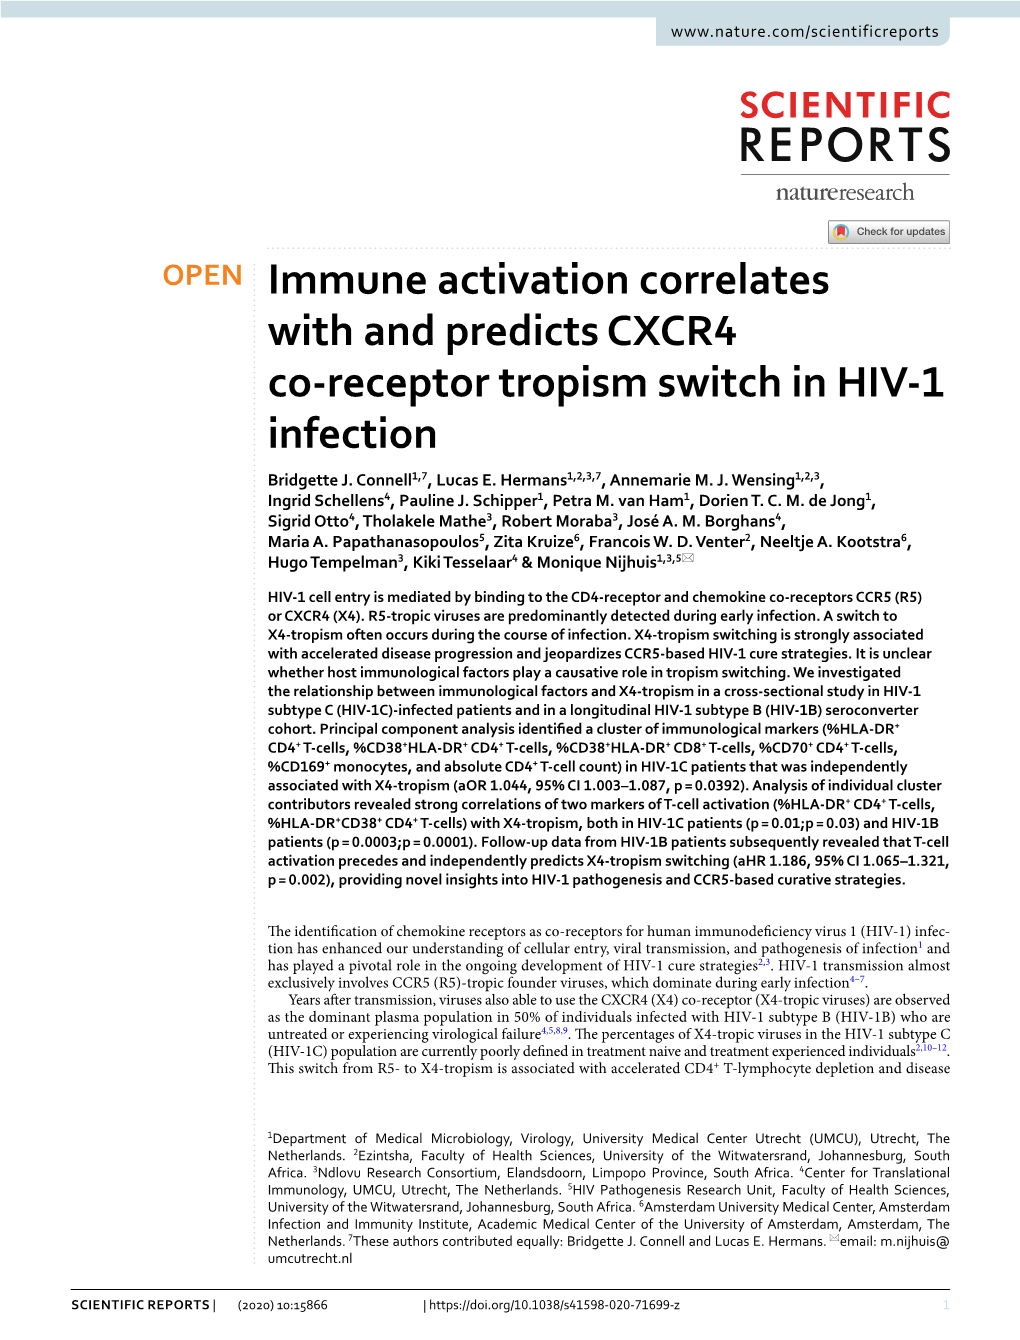 Immune Activation Correlates with and Predicts CXCR4 Co-Receptor